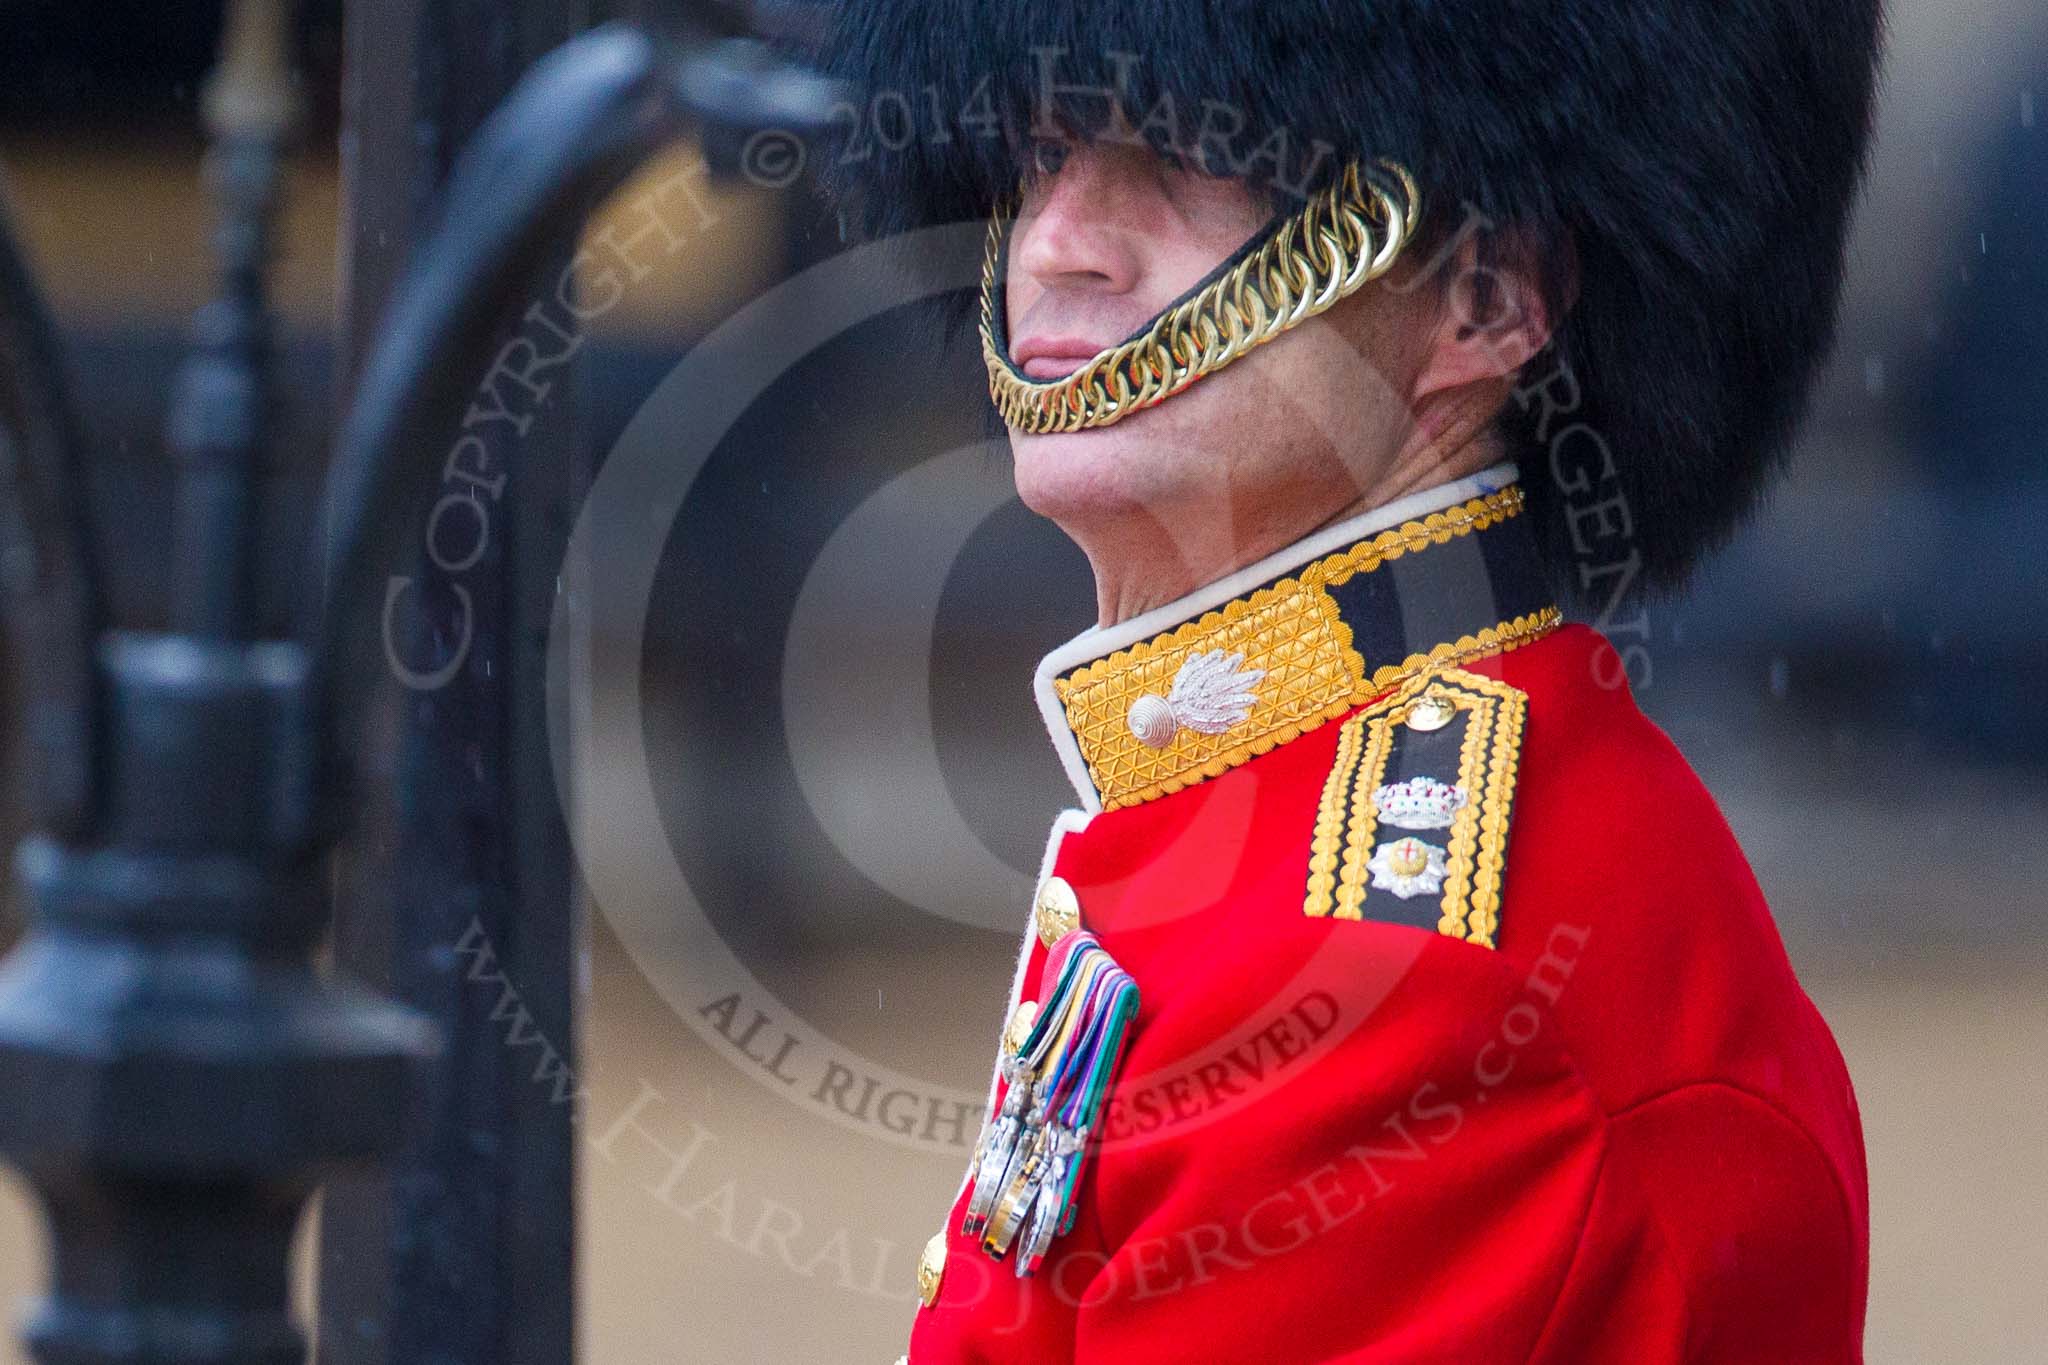 The Colonel's Review 2014.
Horse Guards Parade, Westminster,
London,

United Kingdom,
on 07 June 2014 at 10:33, image #146